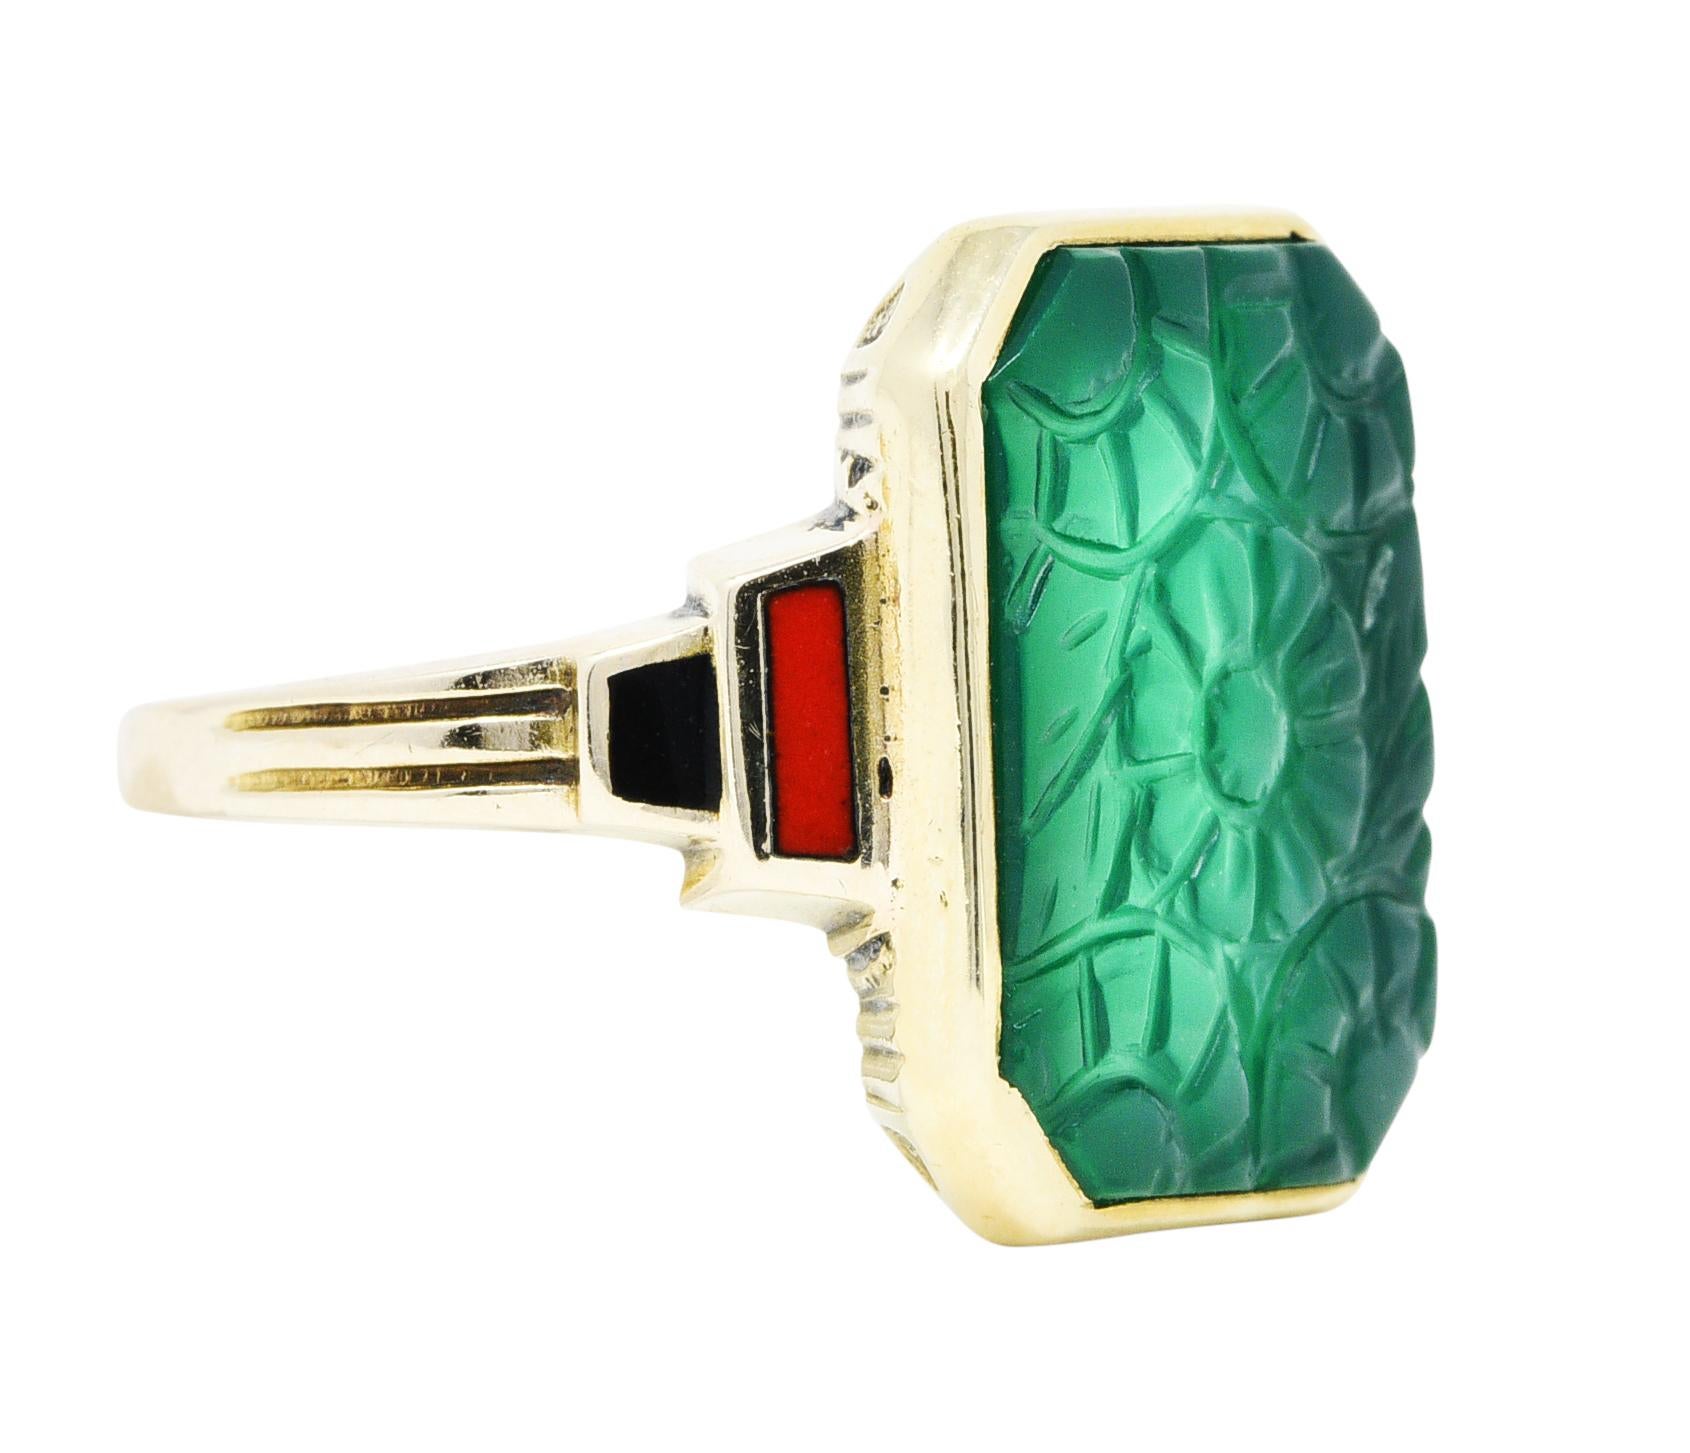 Octagonal ring is bezel set with a carved tablet of chrysoprase

Translucent bluish green in color and deeply carved to depict florals

With stepped shoulders glossed in orangey red and black enamel

Completed by deeply ribbed details at shoulder